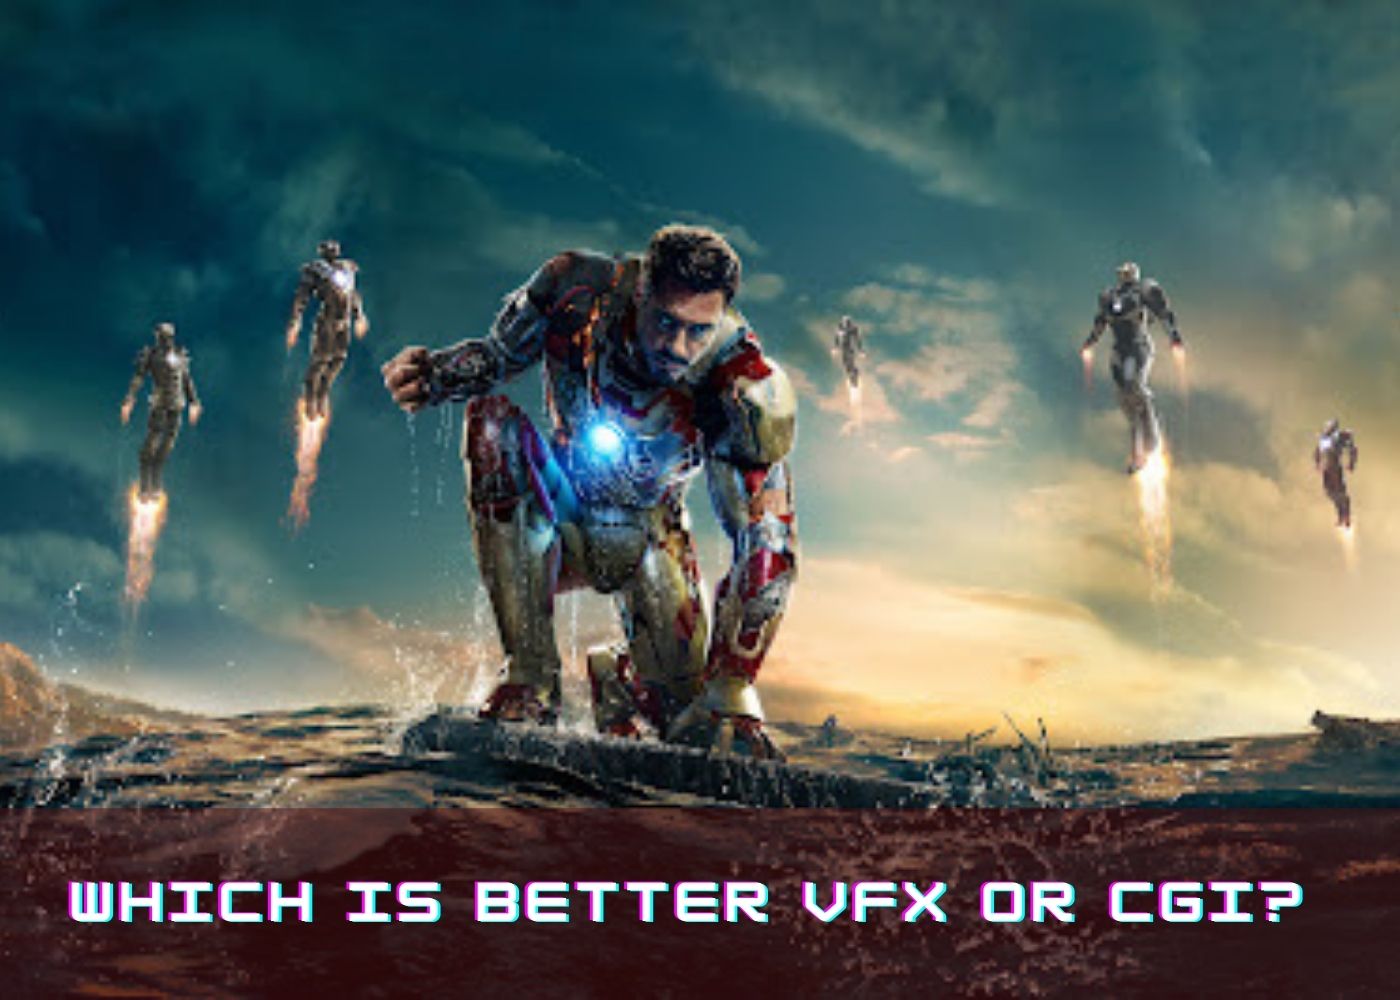 Which is better VFX or CGI? 